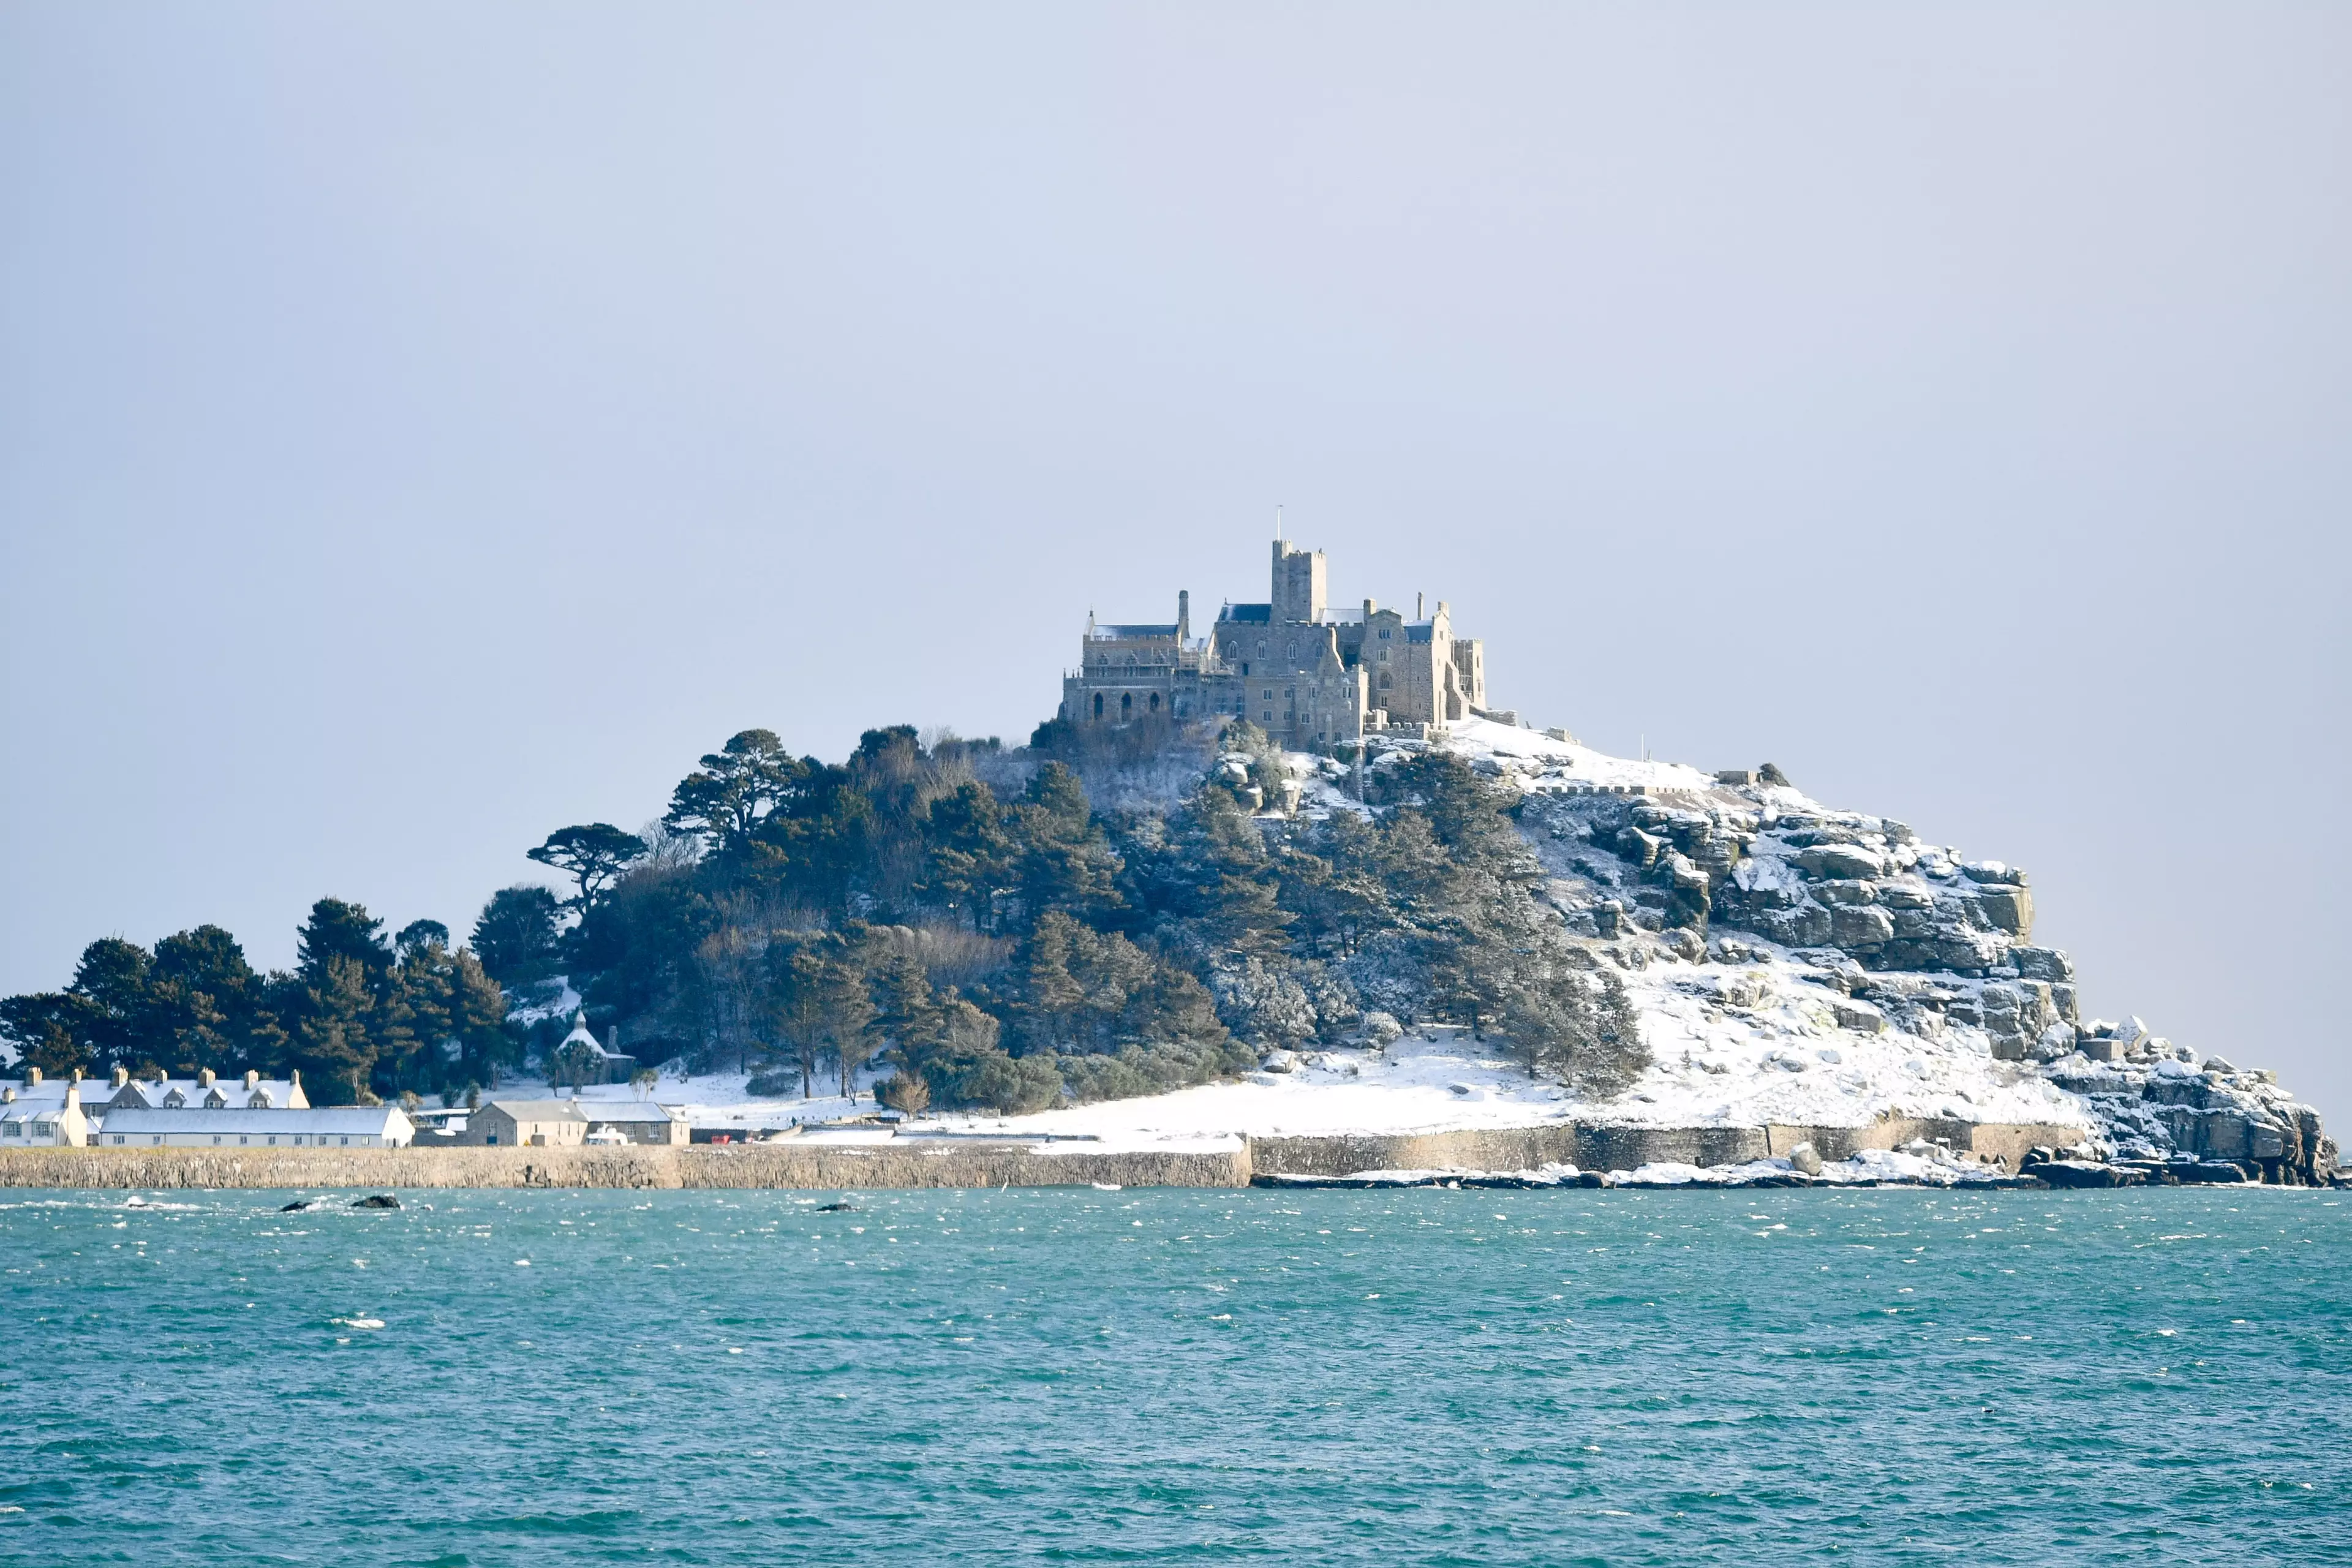 The castle in the snow.